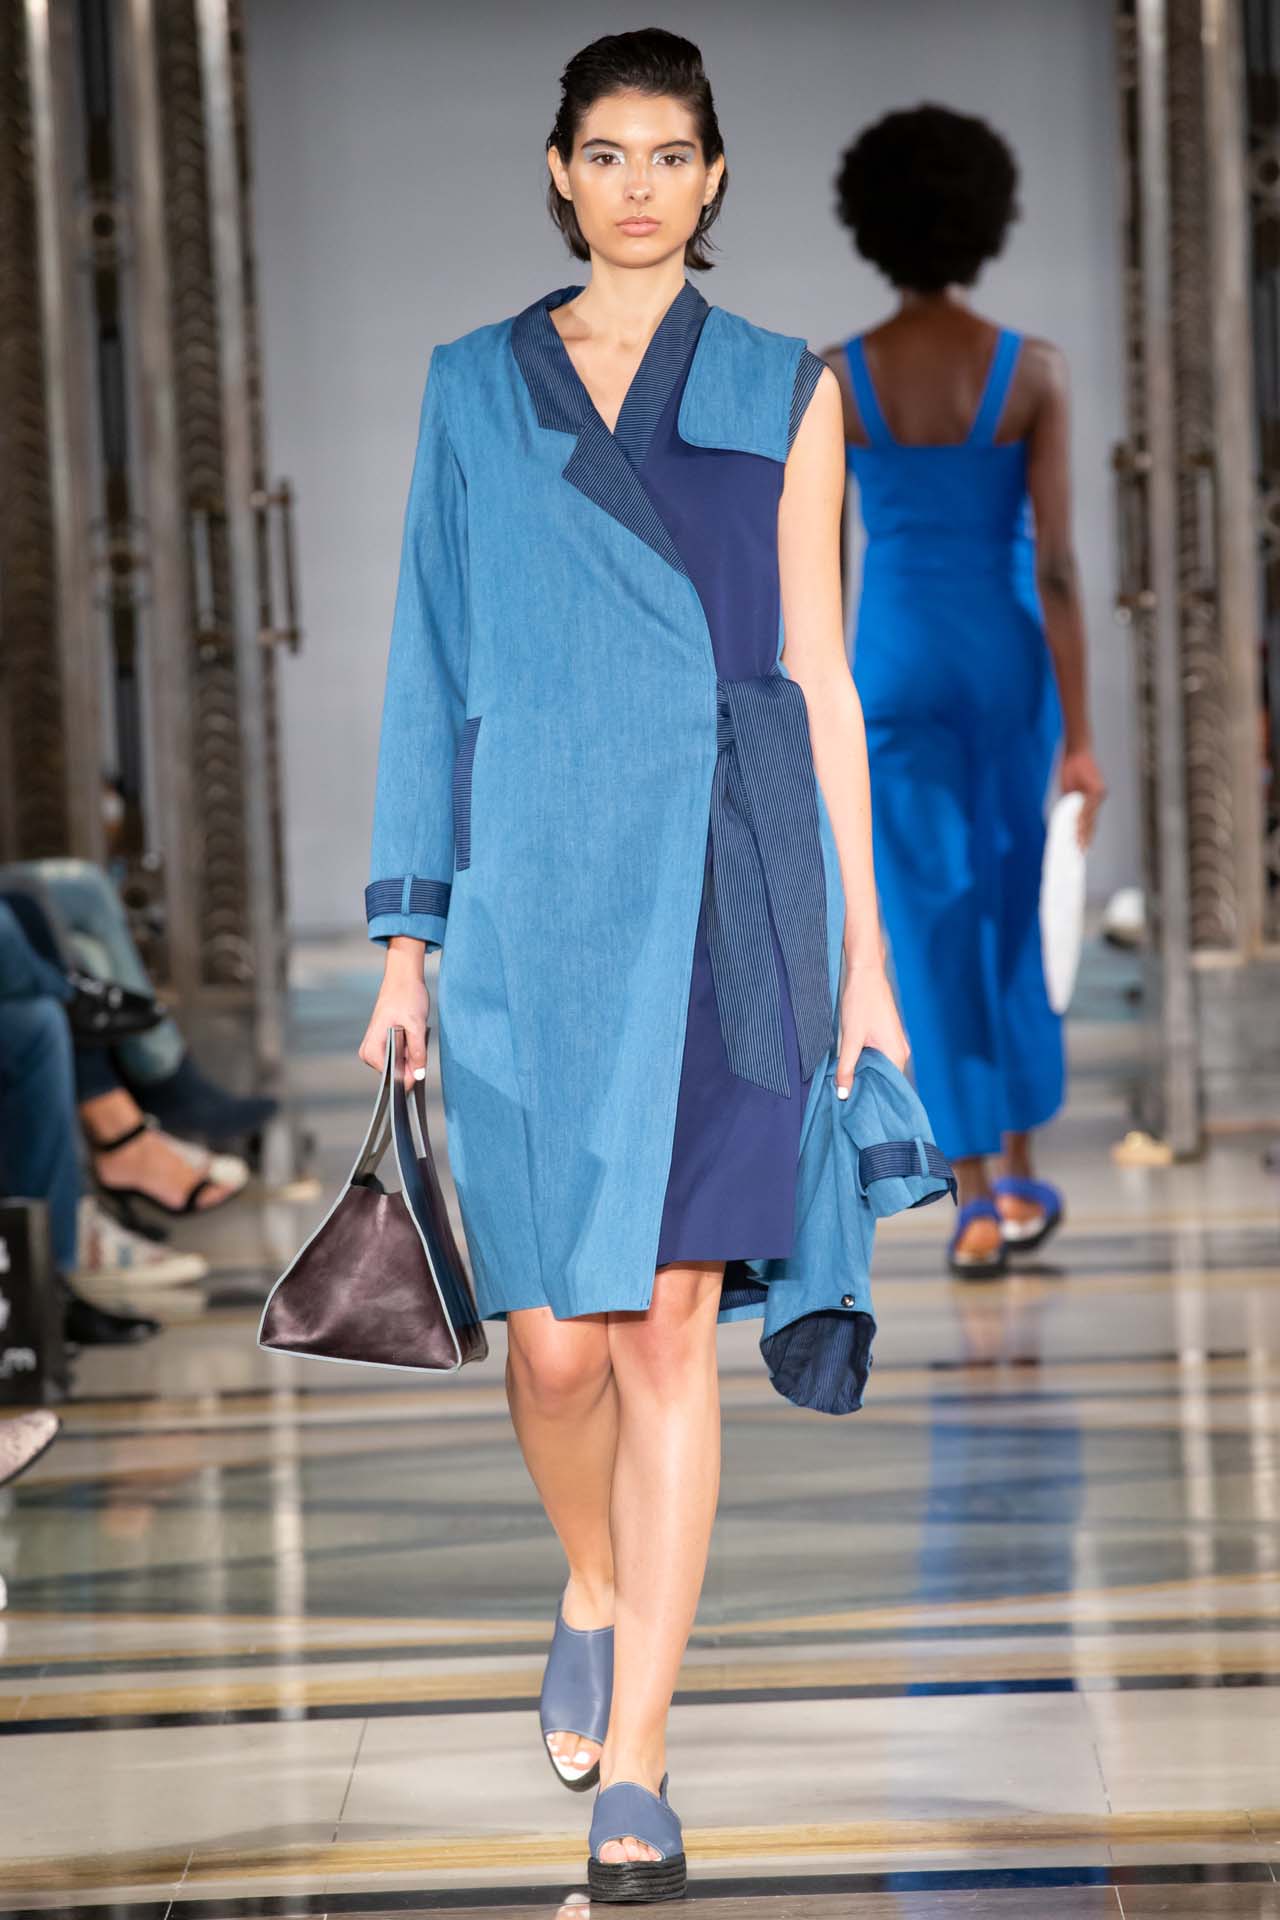 Tunisian designer Anissa at Aida presented during LFW SS19 collection her to Fashion crowds